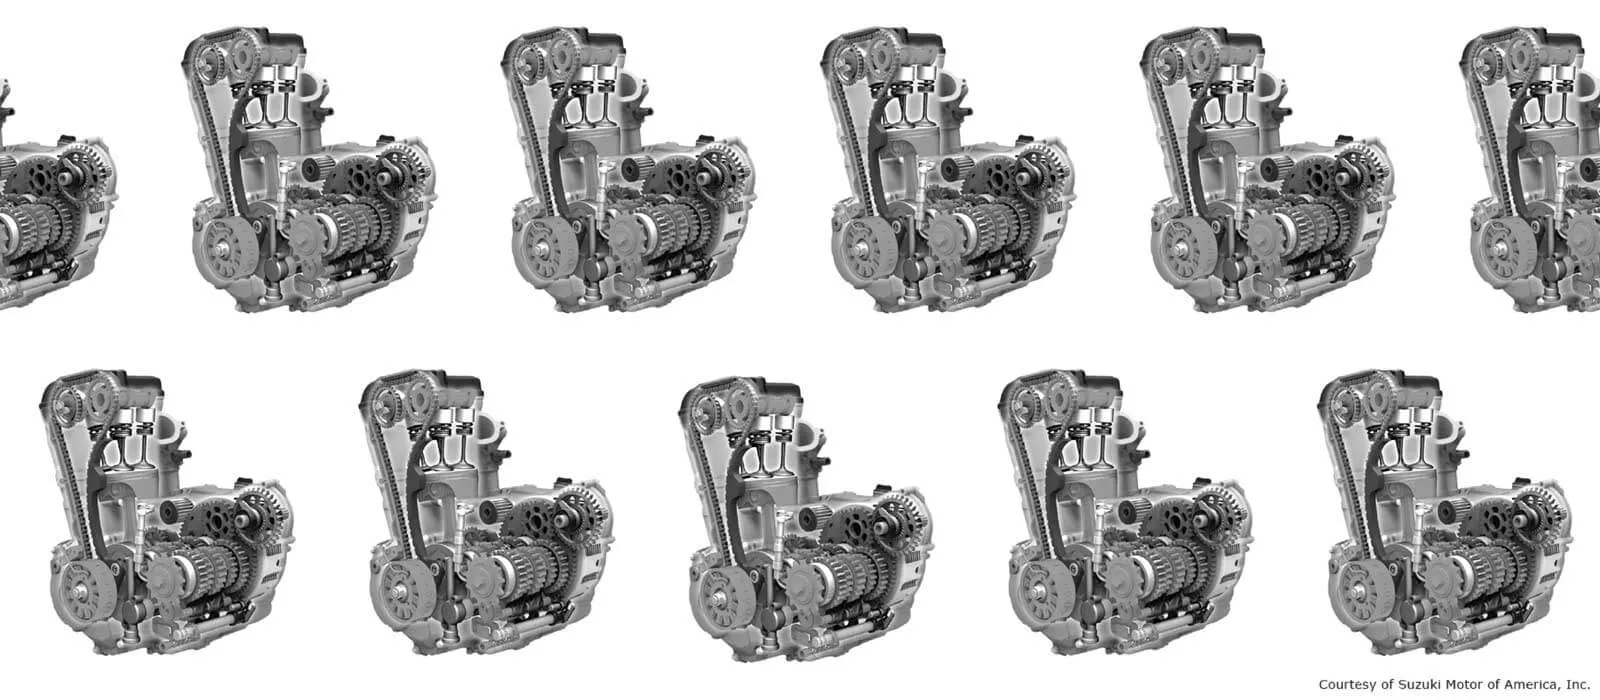 4-Stroke Engines: What Are They and How Do They Work?